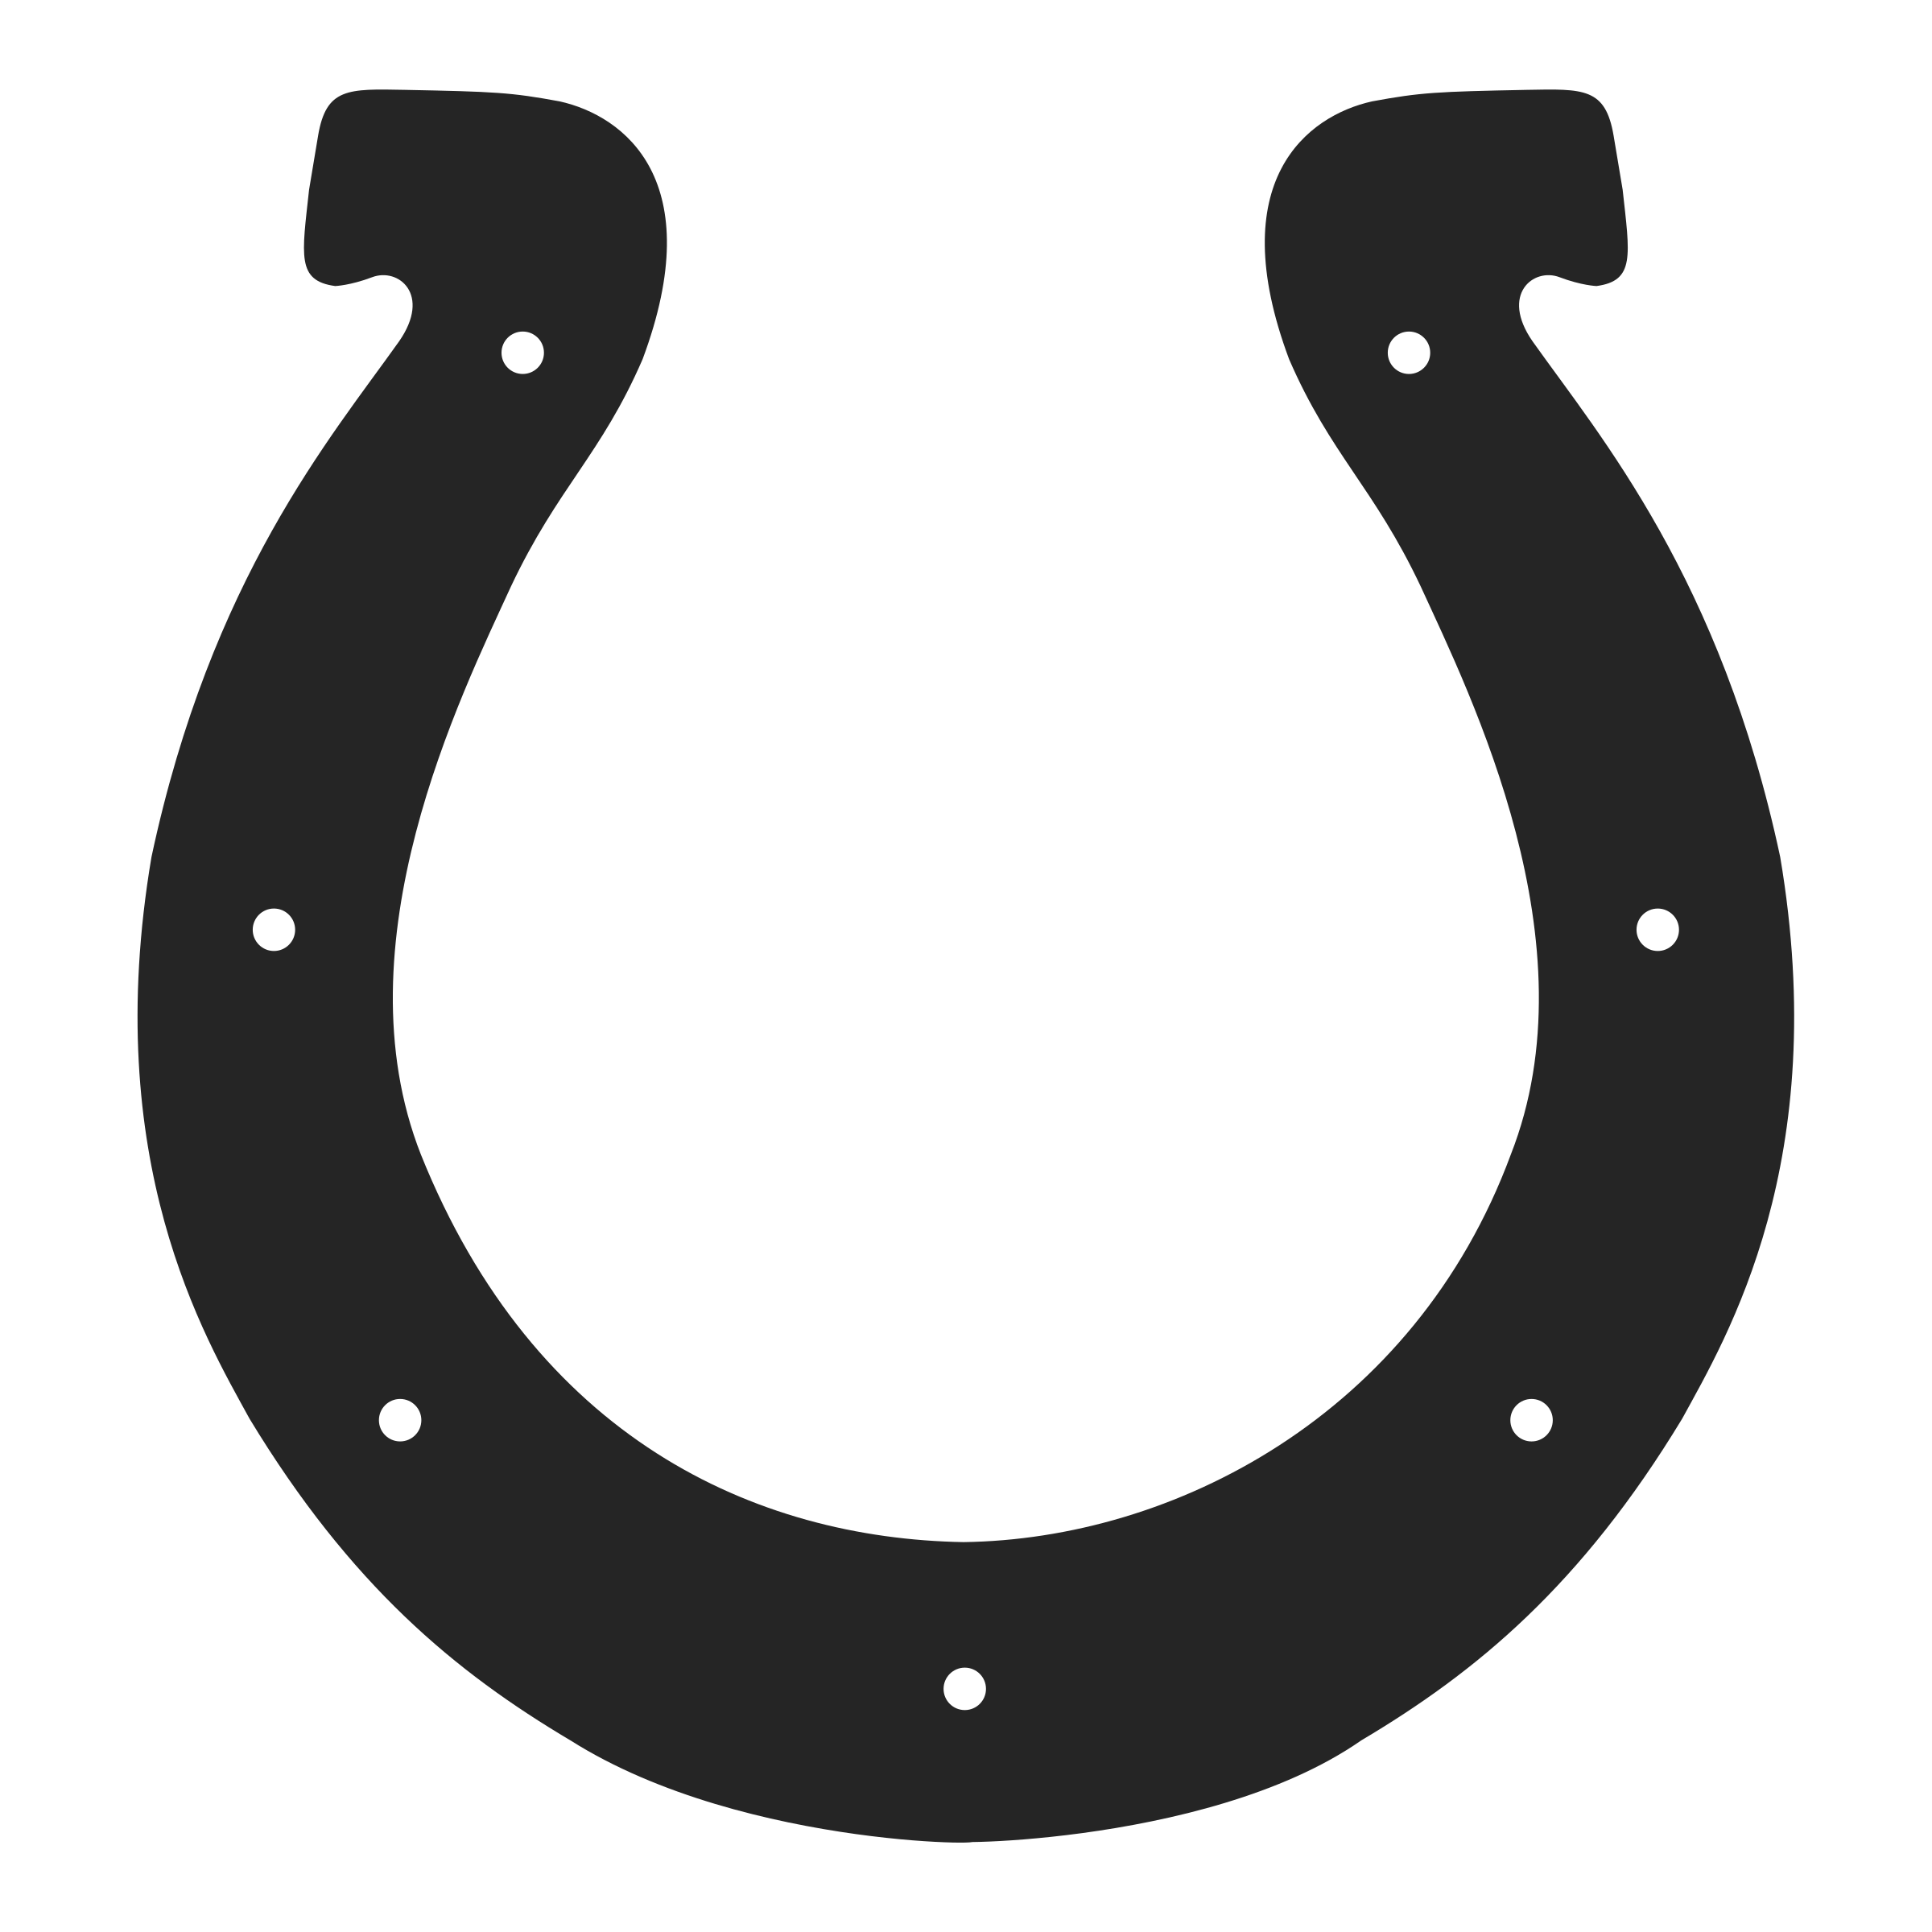 Partnering With the Colts